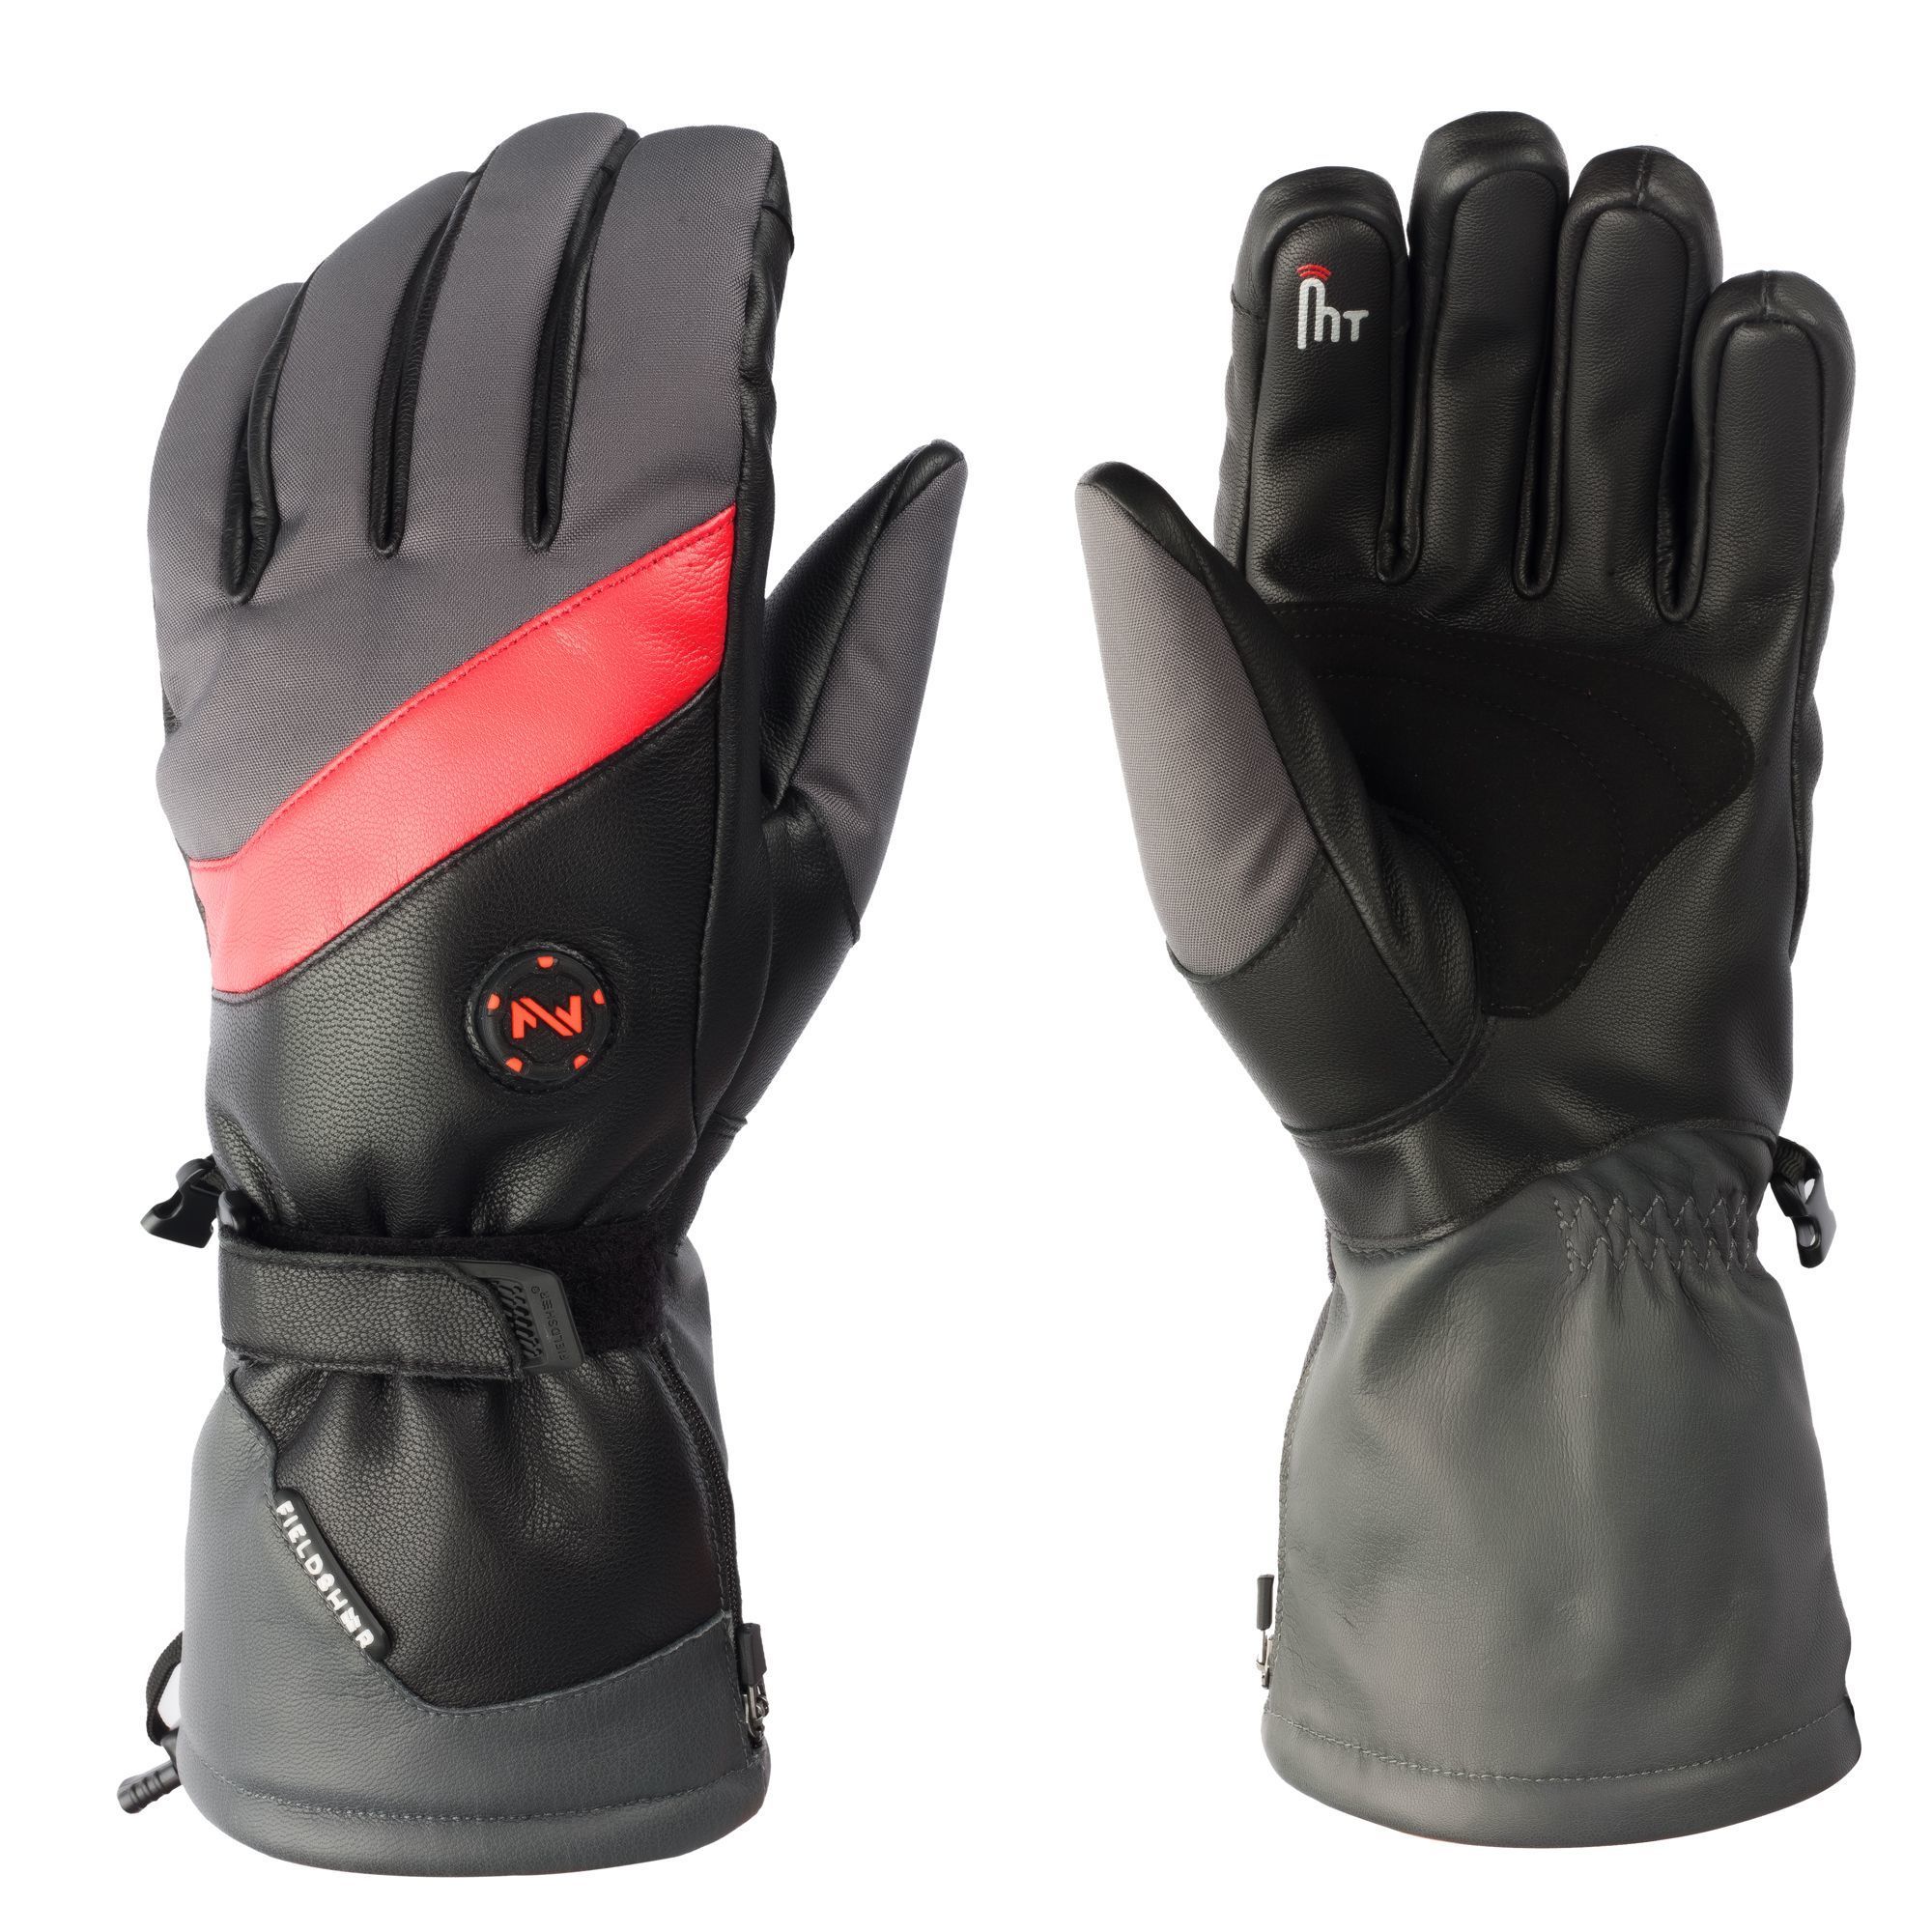 Fieldsheer, Slope Style Glove | Unisex | 7.4V | GRY | 2X, Size 2XL, Color Gray, Included (qty.) 2 Model MWUG02240620 -  MOBILE WARMING